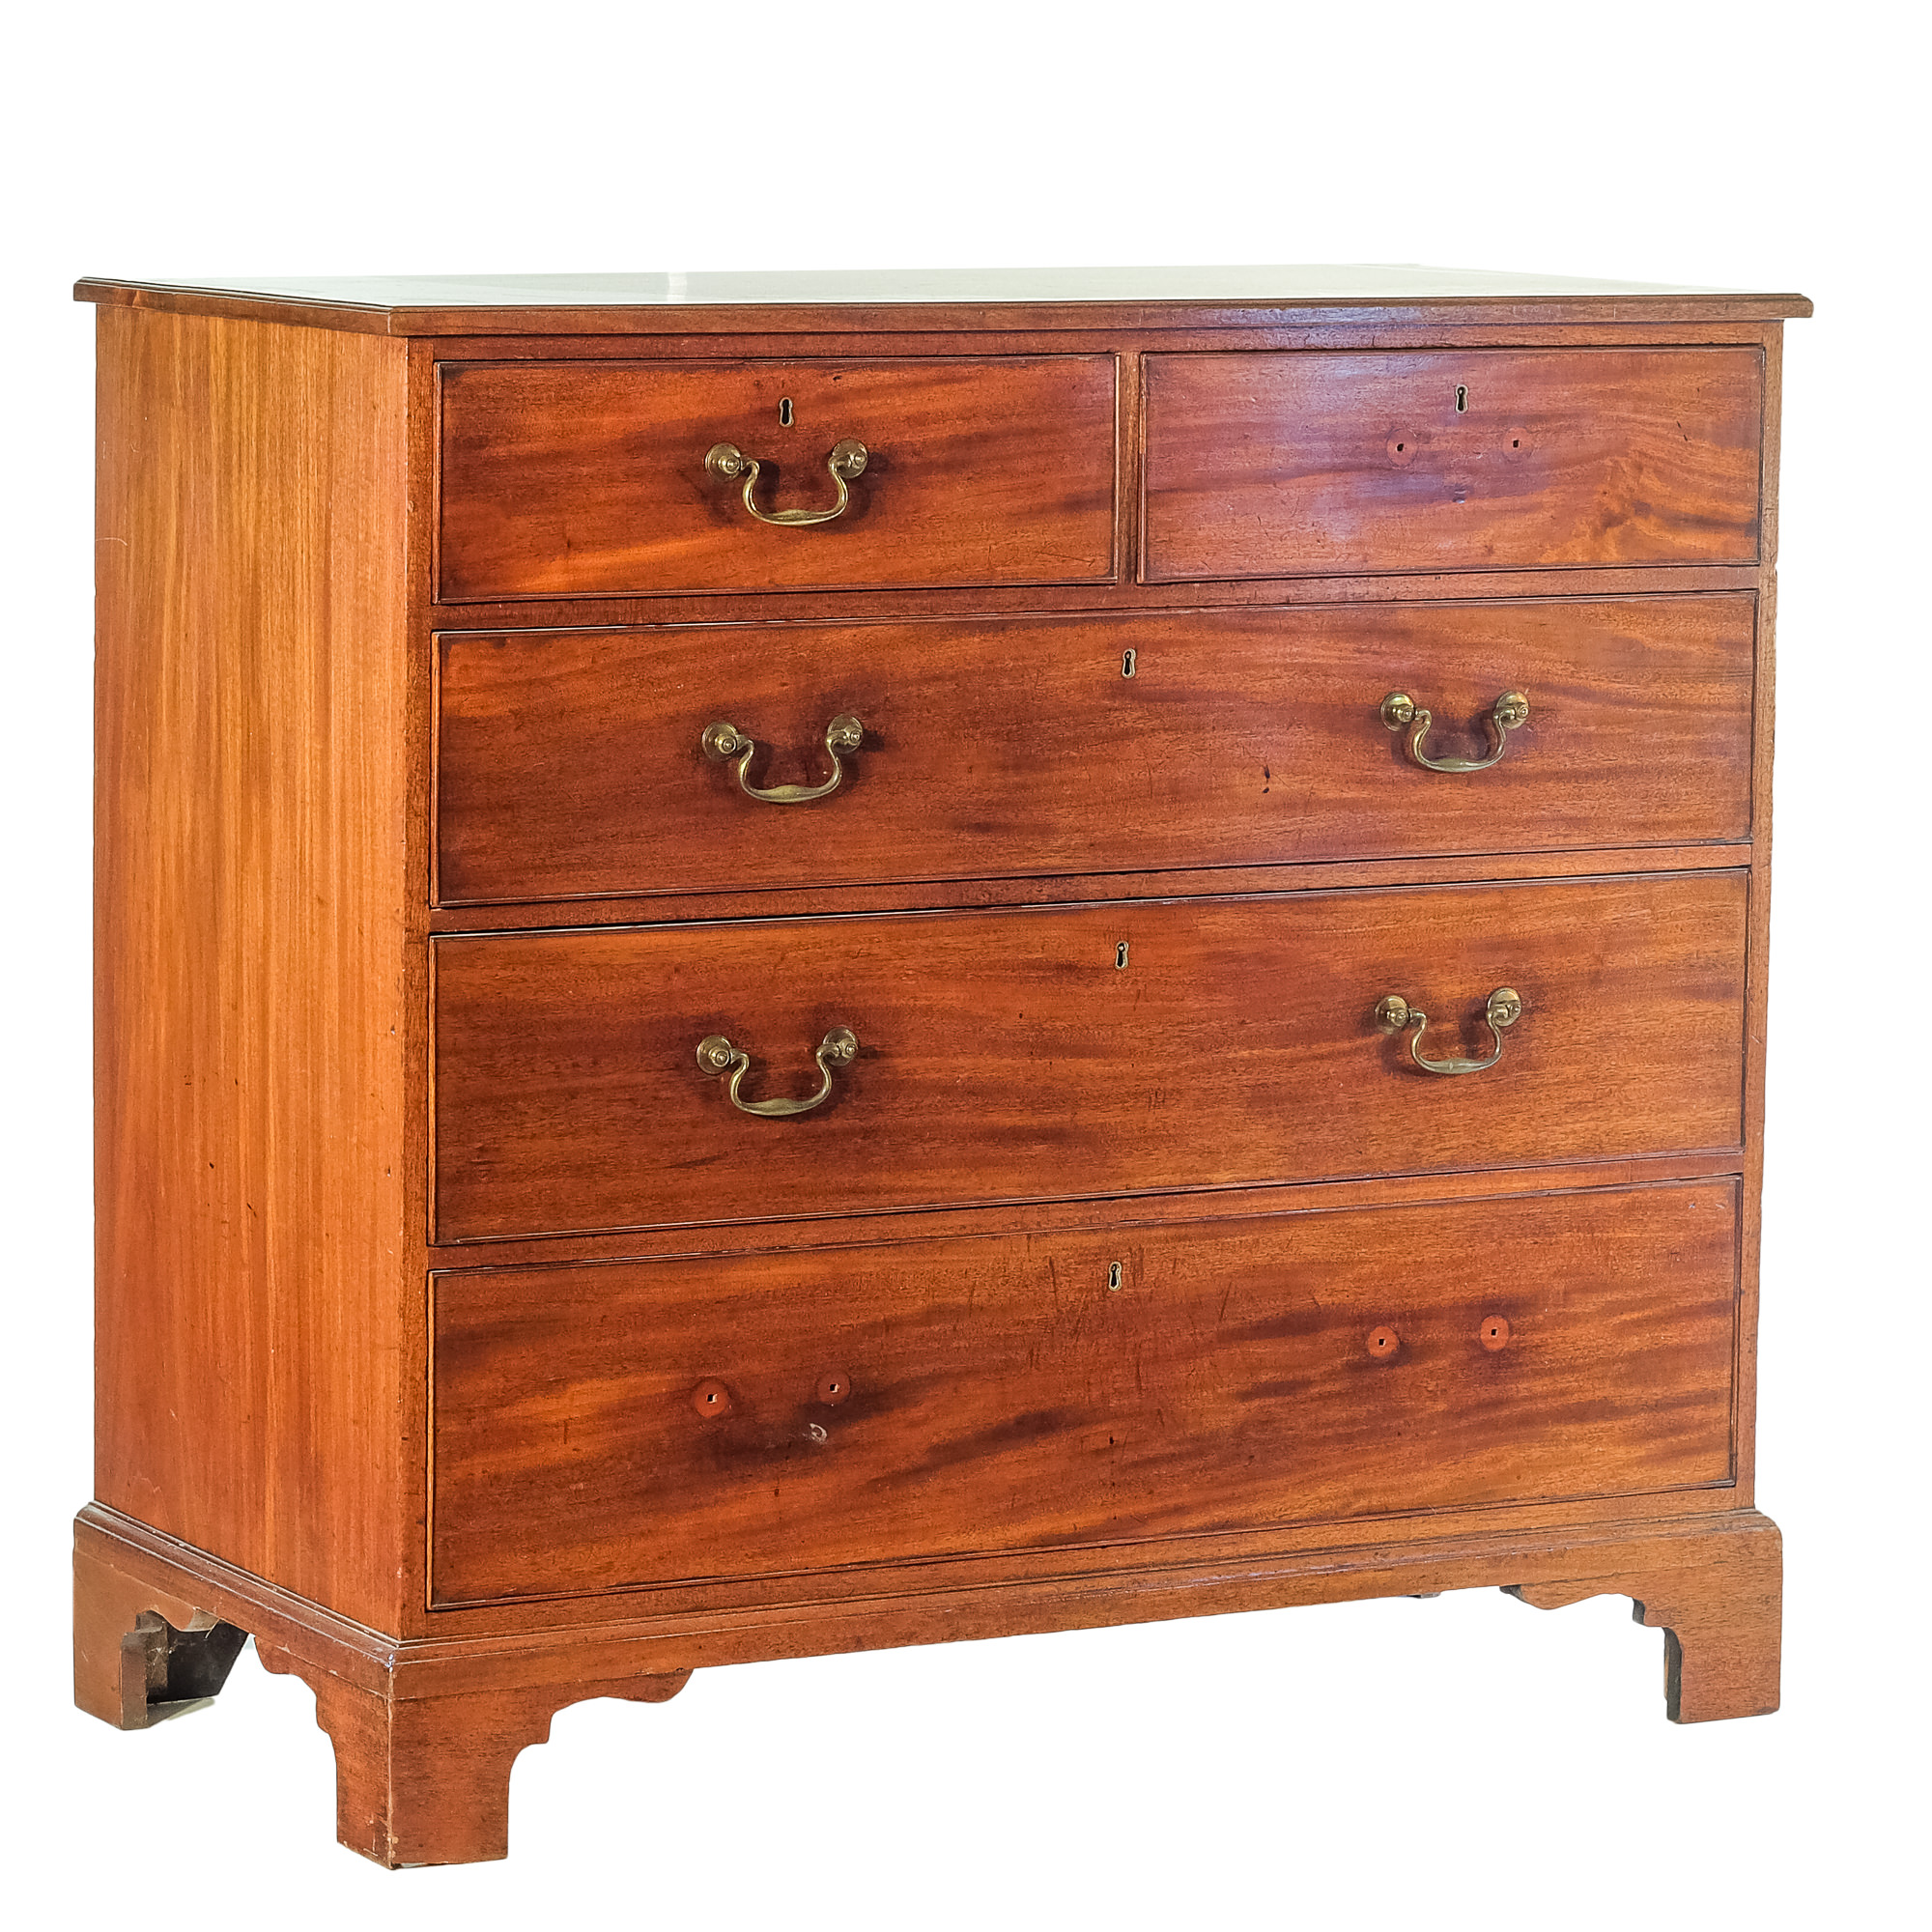 'Georgian Mahogany Chest of Drawers with Bracket Feet Early 19th Century'